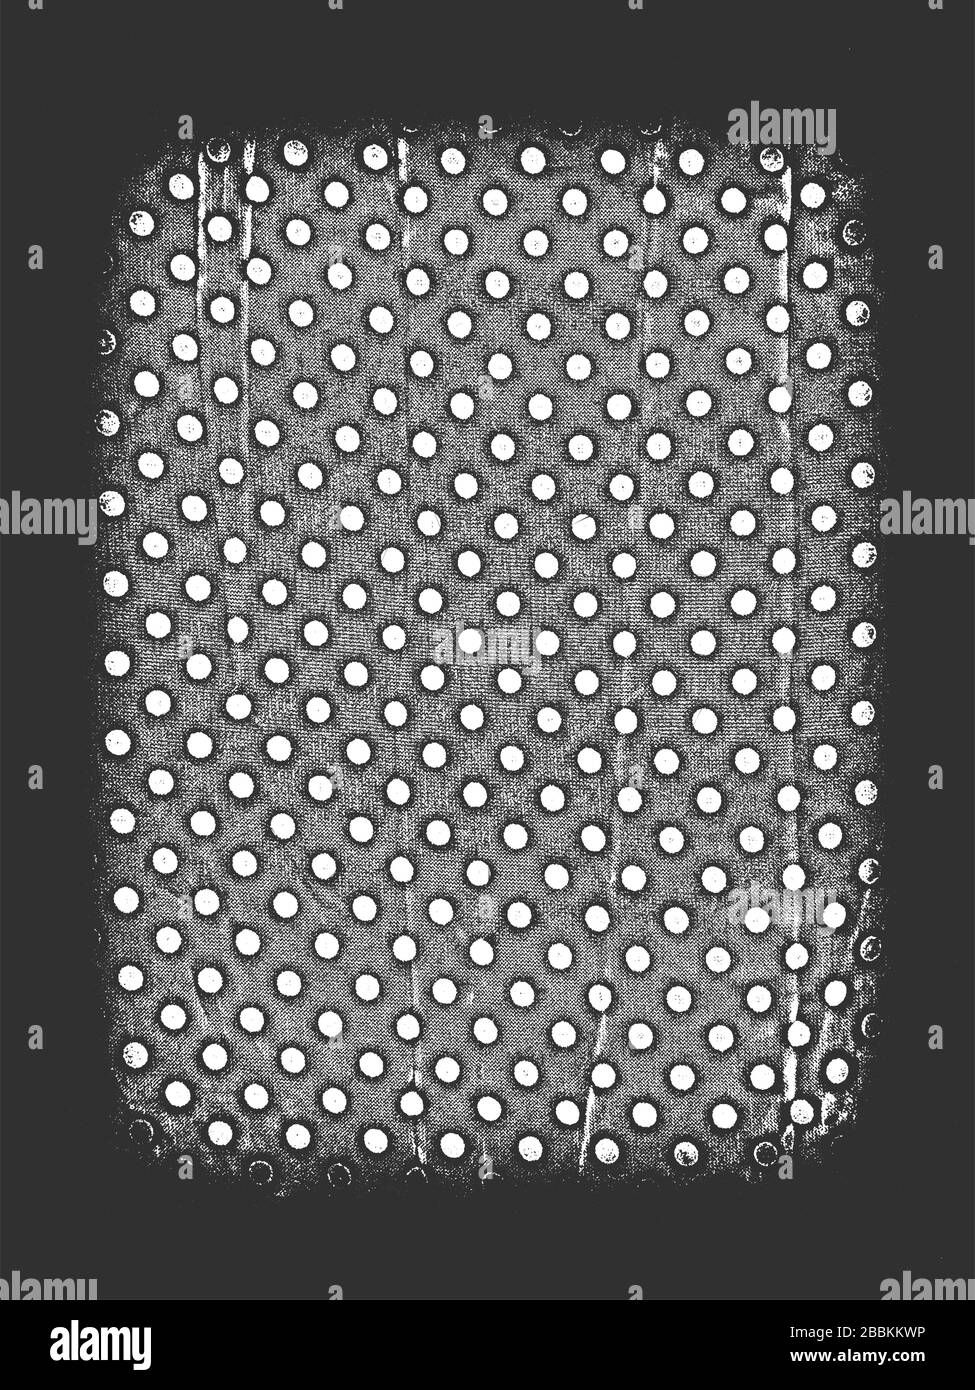 Distress grunge vector texture of fabric with polka dot ornament and vignette. Black and white background. EPS 8 illustration Stock Vector